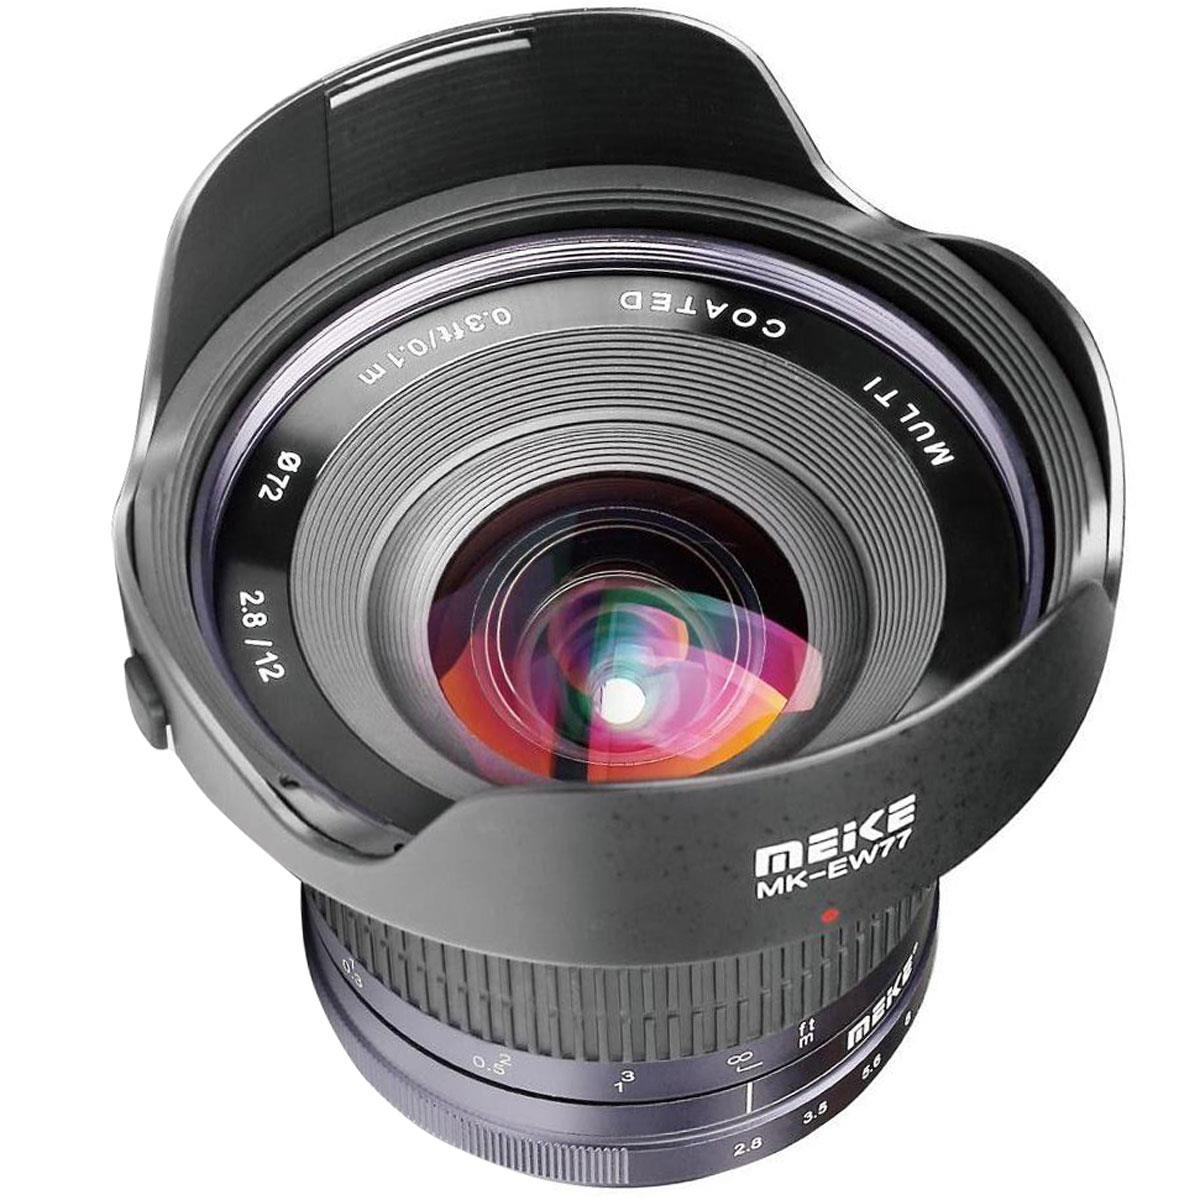 Meike 12mm f/2.8 Lens for Fujifilm X, Black #19950002 - Picture 1 of 1